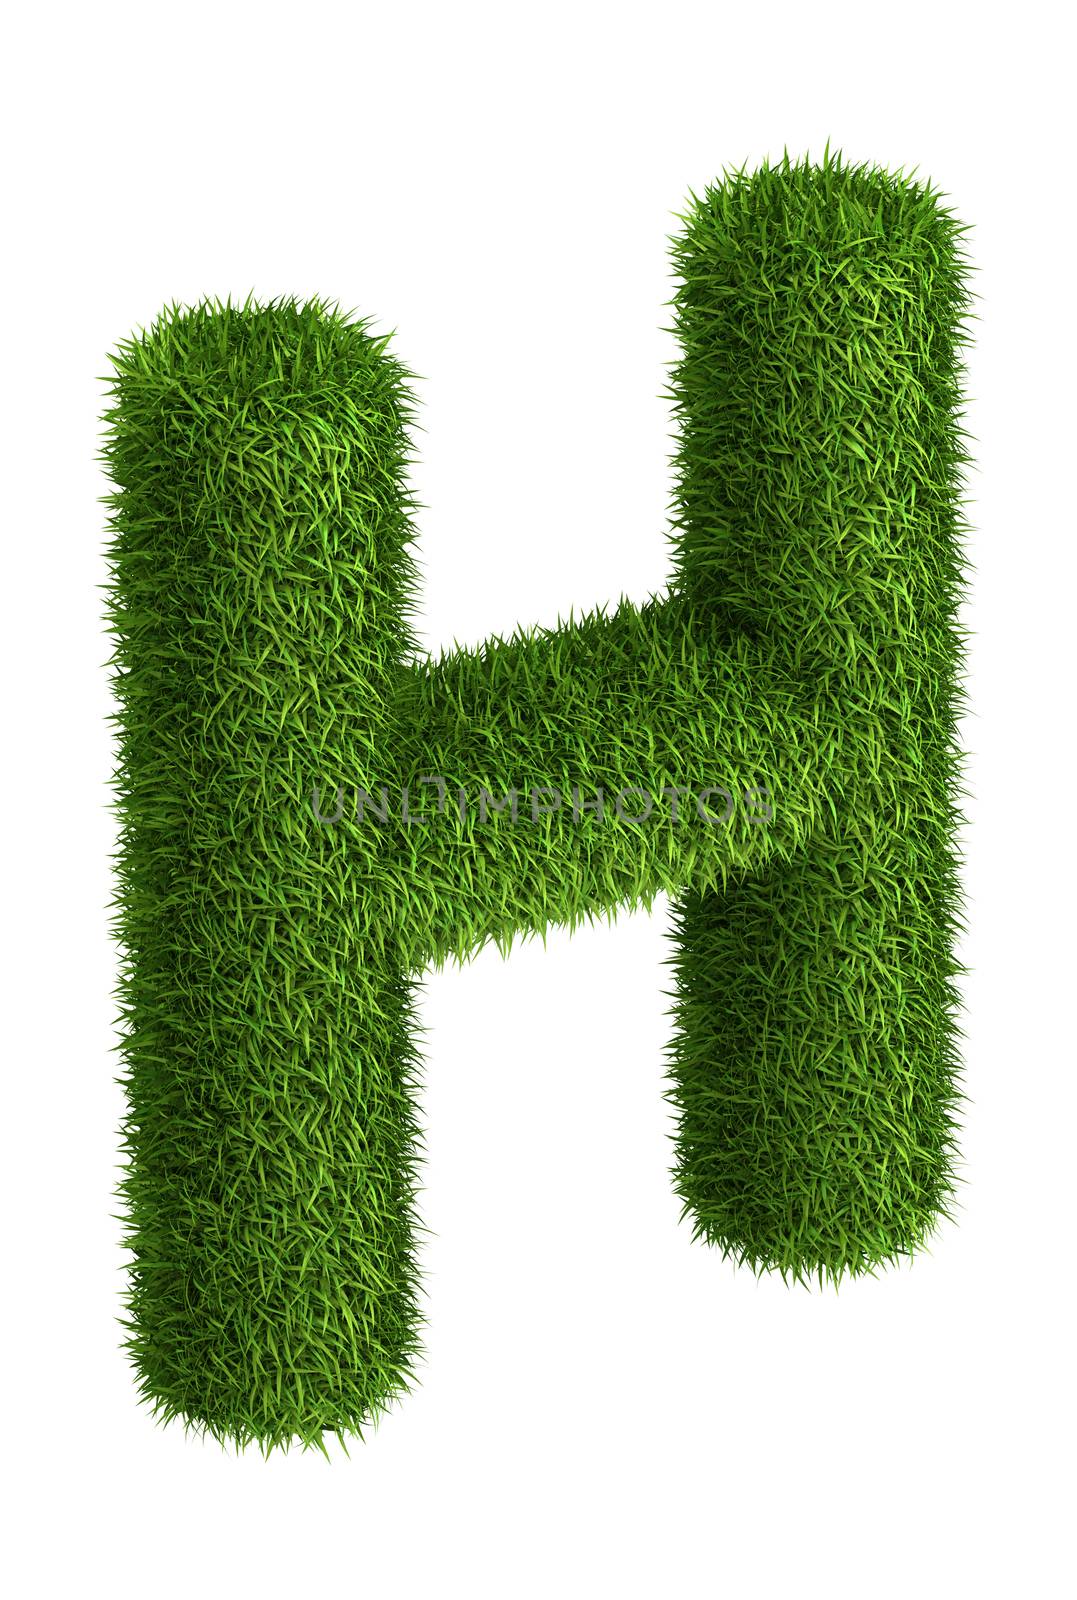 Natural grass letter H by iunewind